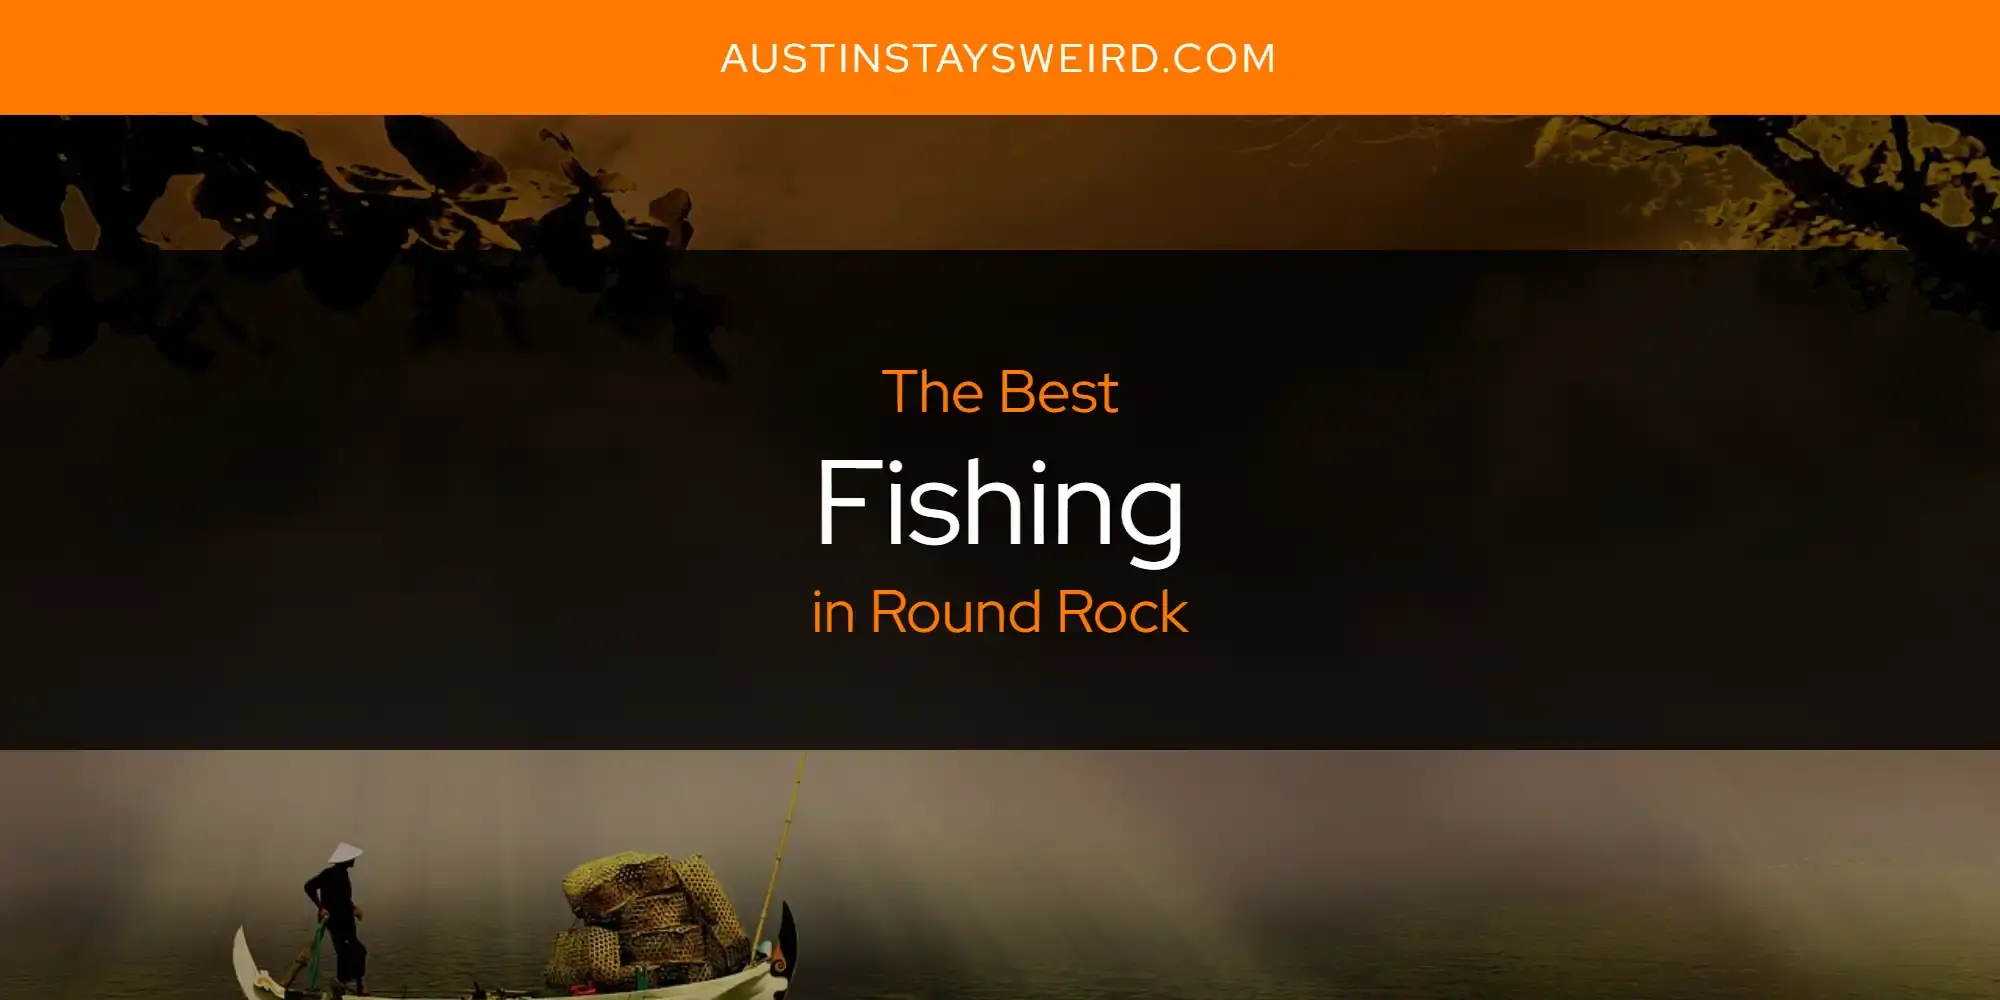 Best Fishing in Round Rock? Here's the Top 8